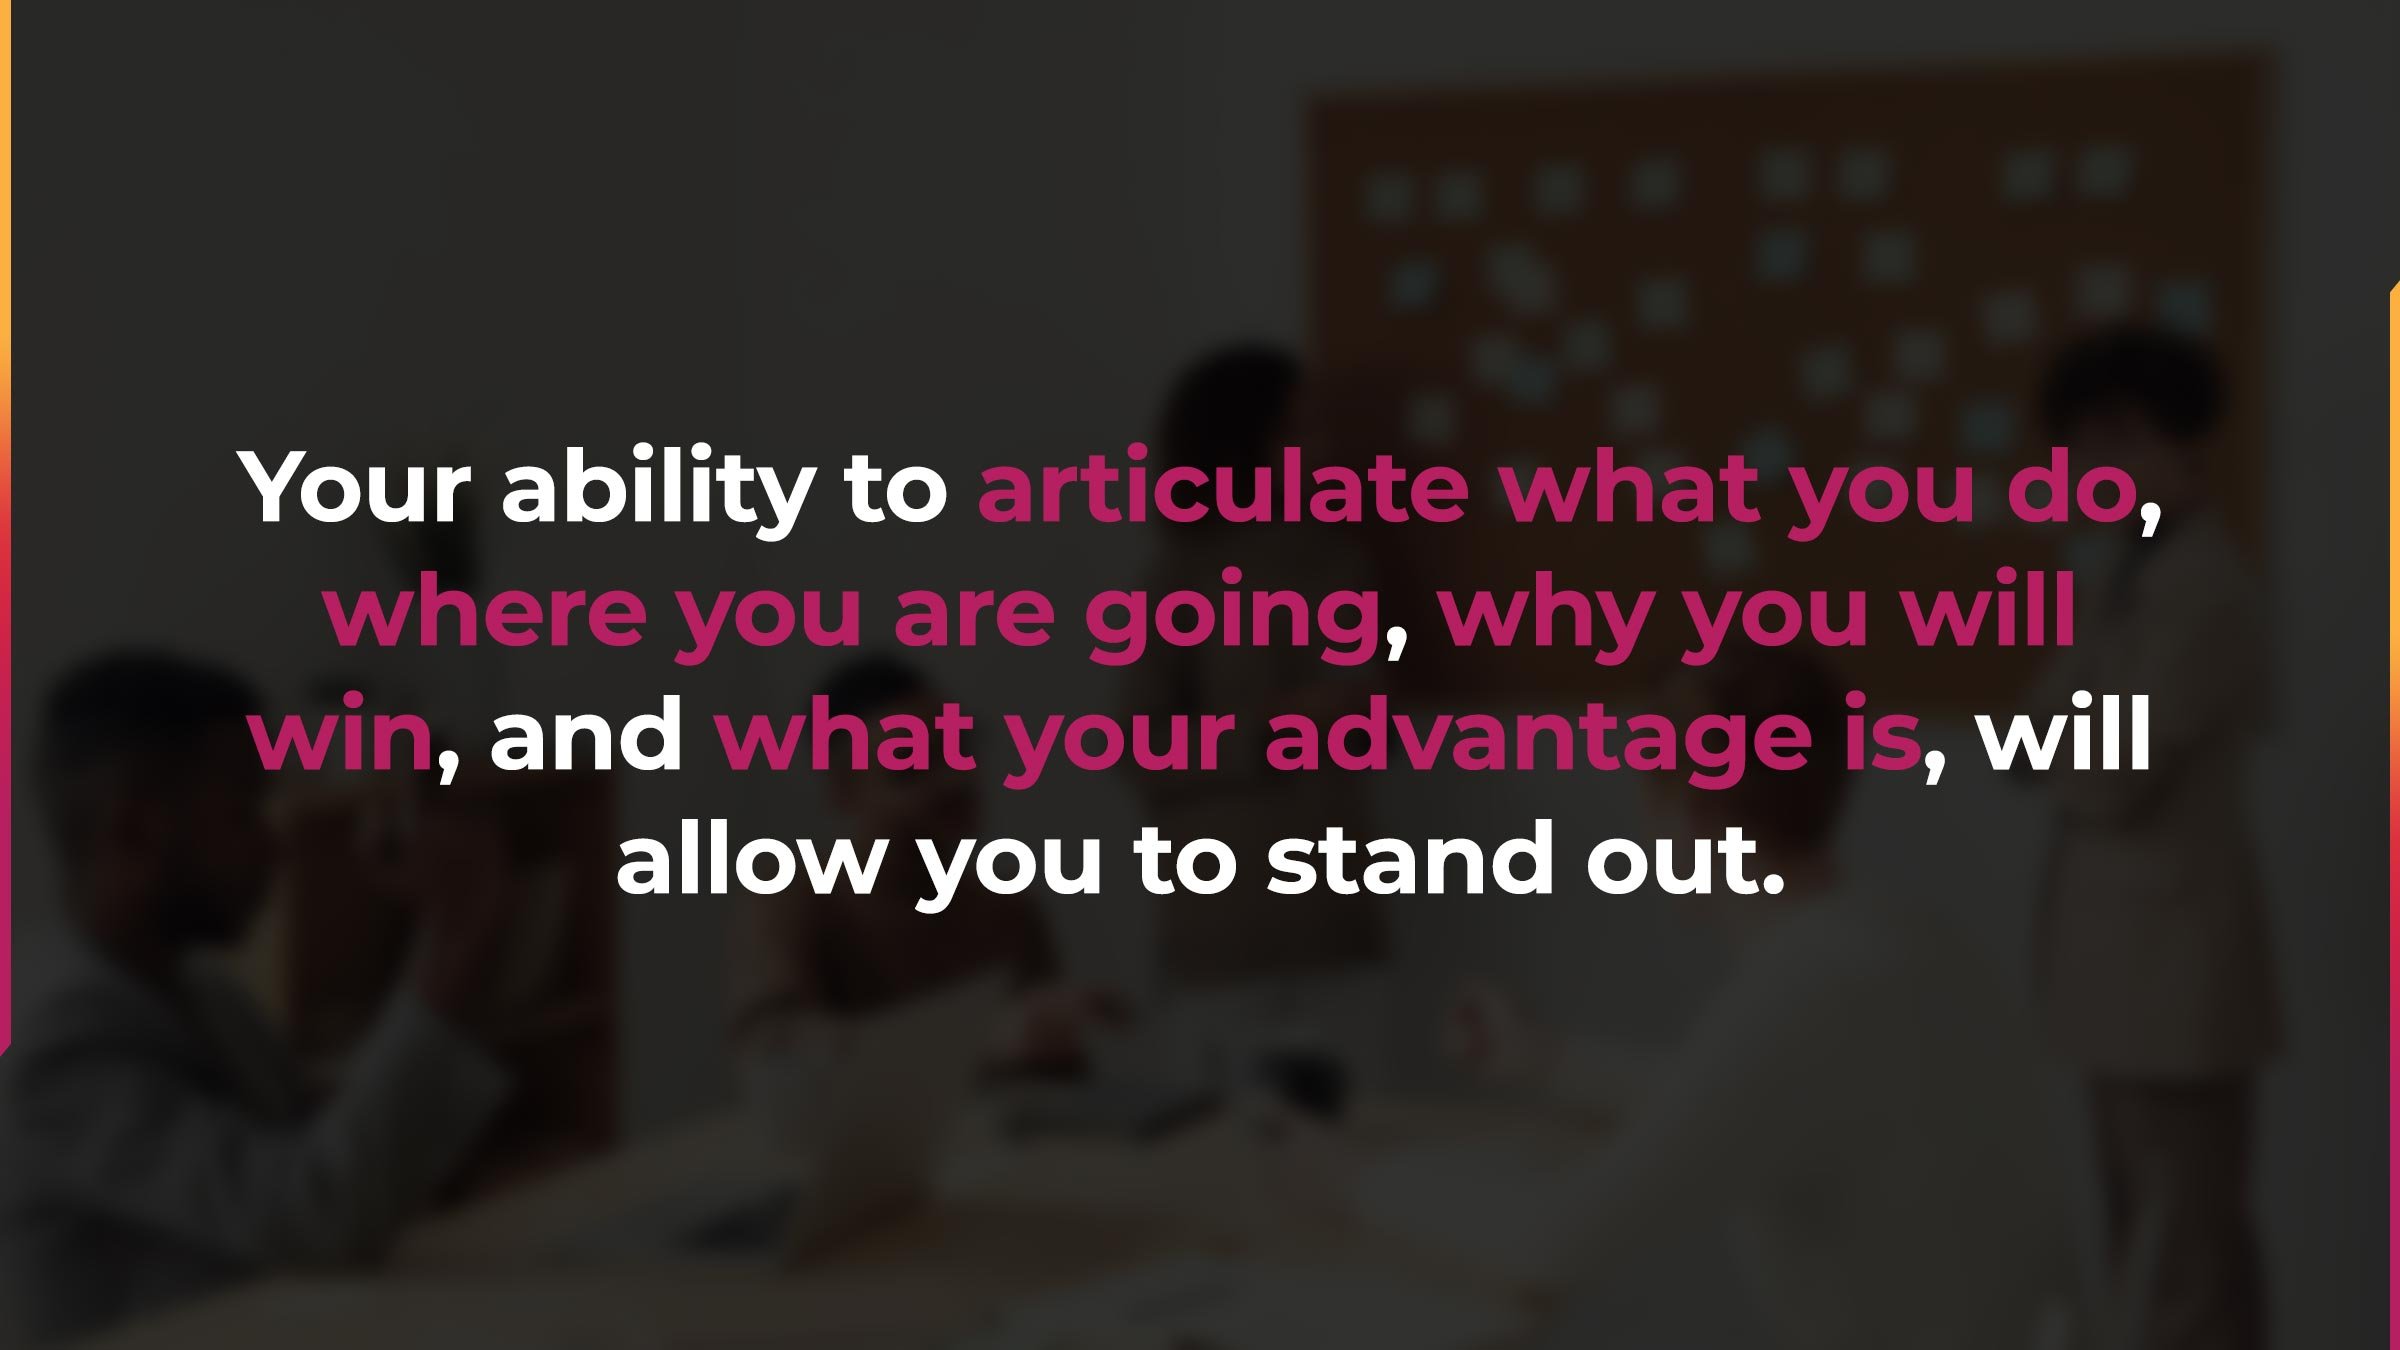 Your ability to articulate what you do, where you're going, why you will win, and what your advantage is, will allow you to stand out